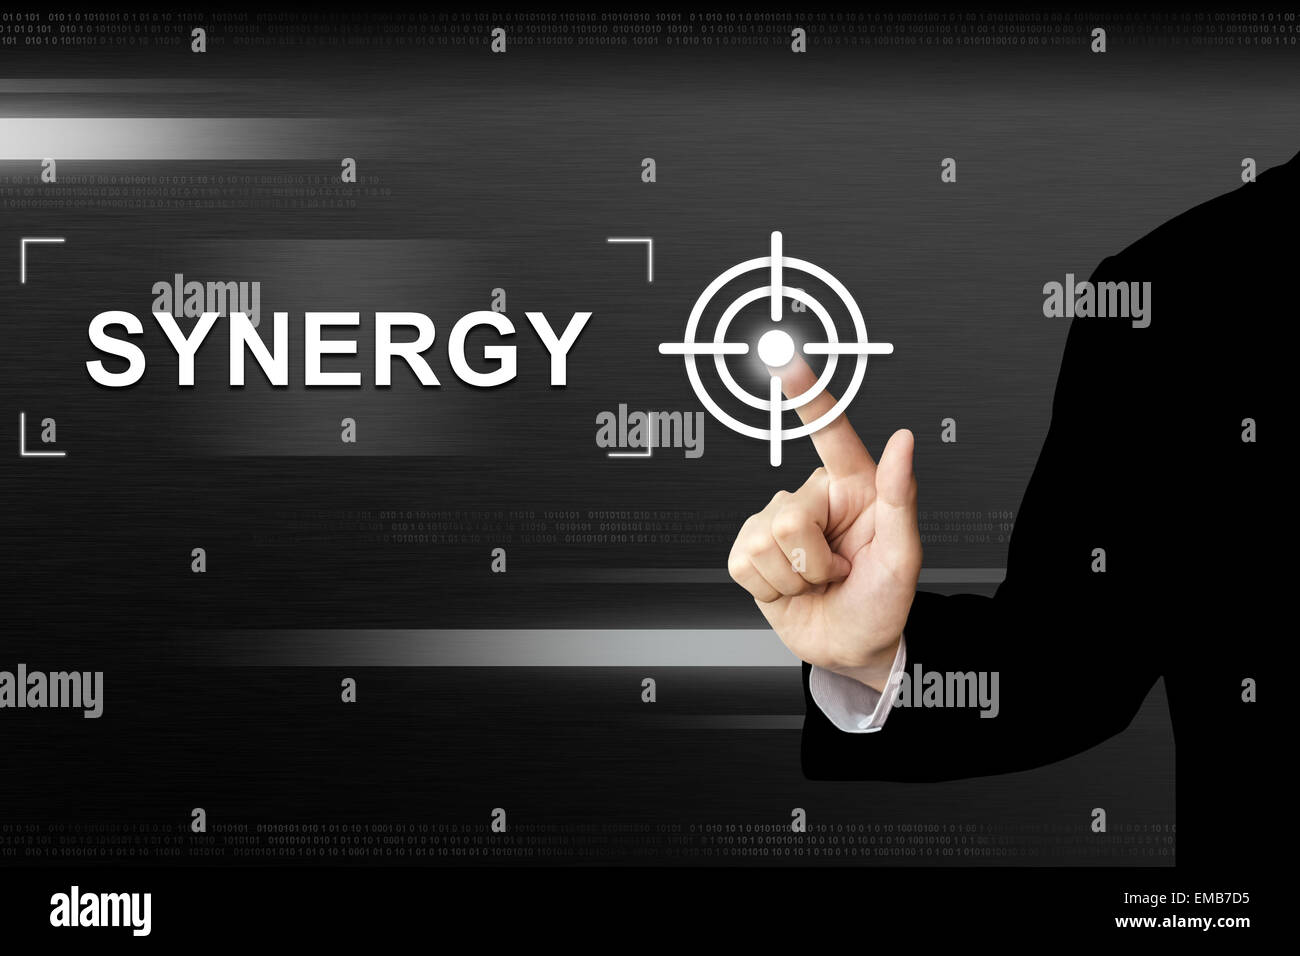 business hand clicking synergy button on a touch screen interface Stock Photo